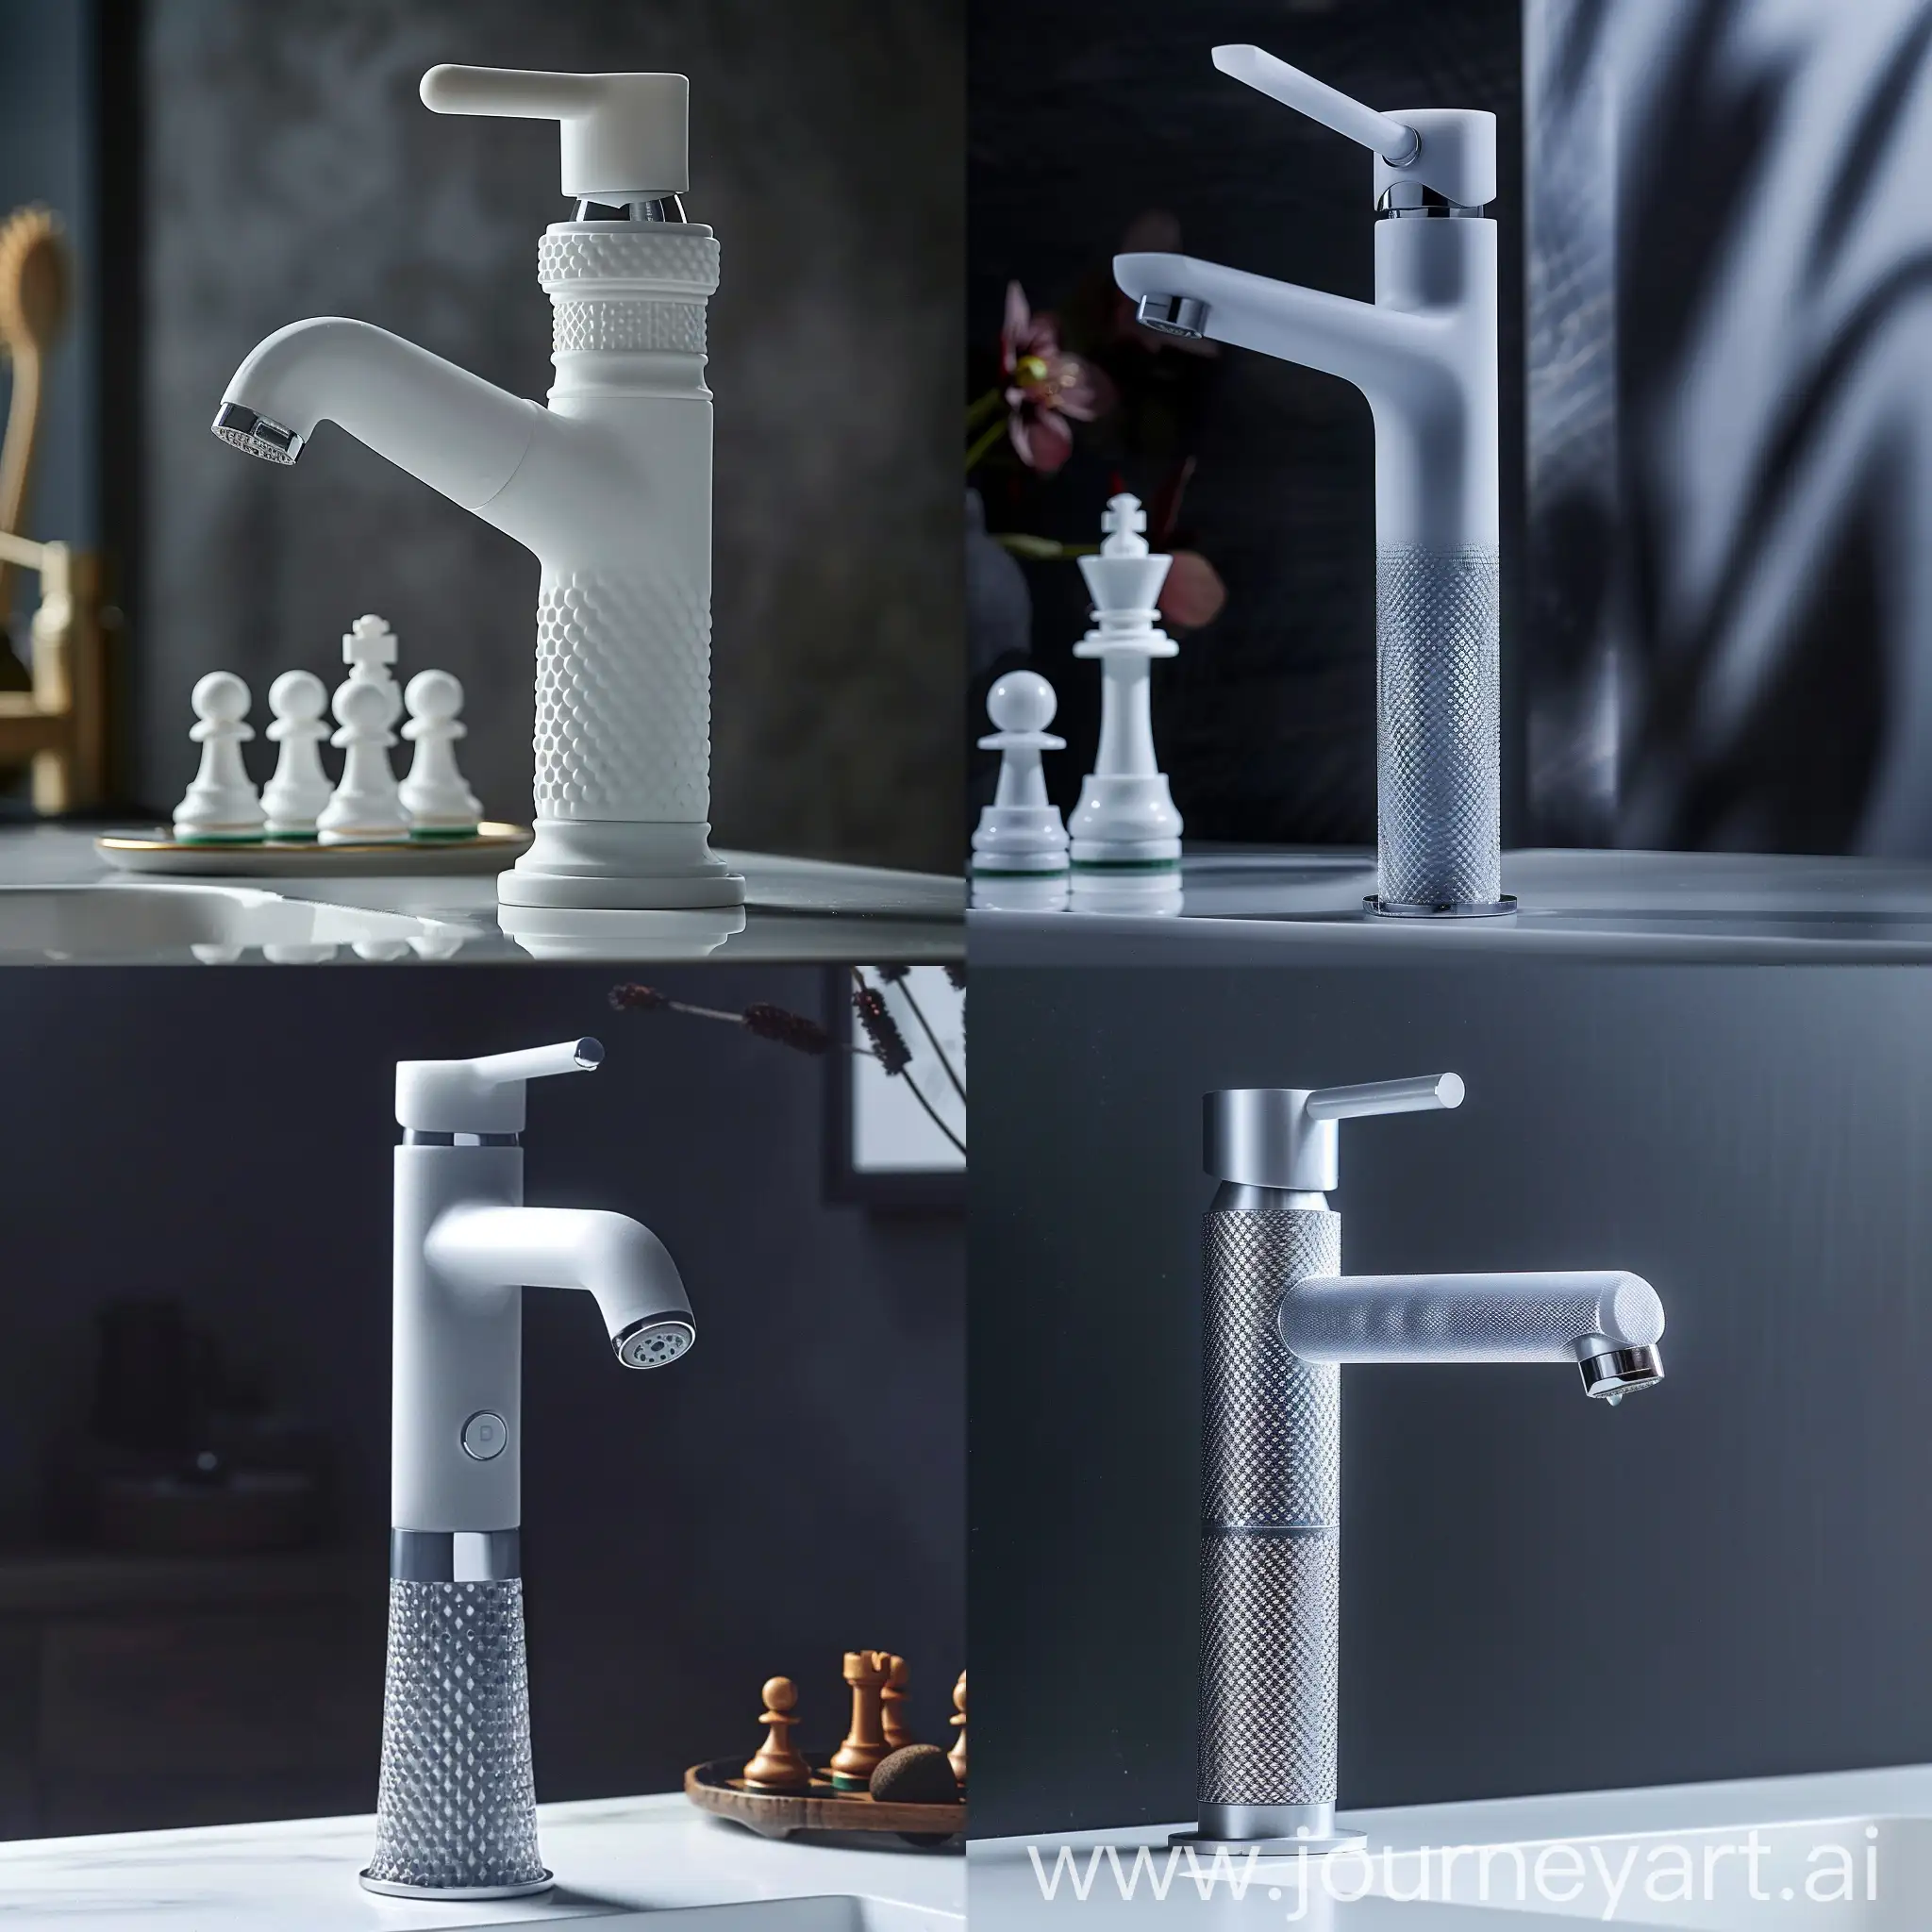 An innovative faucet, with a frosted surface treatment and a rotating water control valve as large as Chinese chess. The surface treatment has special patterns to increase the touch power. The handle connecting the rotating head is short and cute, and the overall faucet is treated with a guide angle, making it feel comfortable, approachable, minimalist, advertising photography, and studio lighting